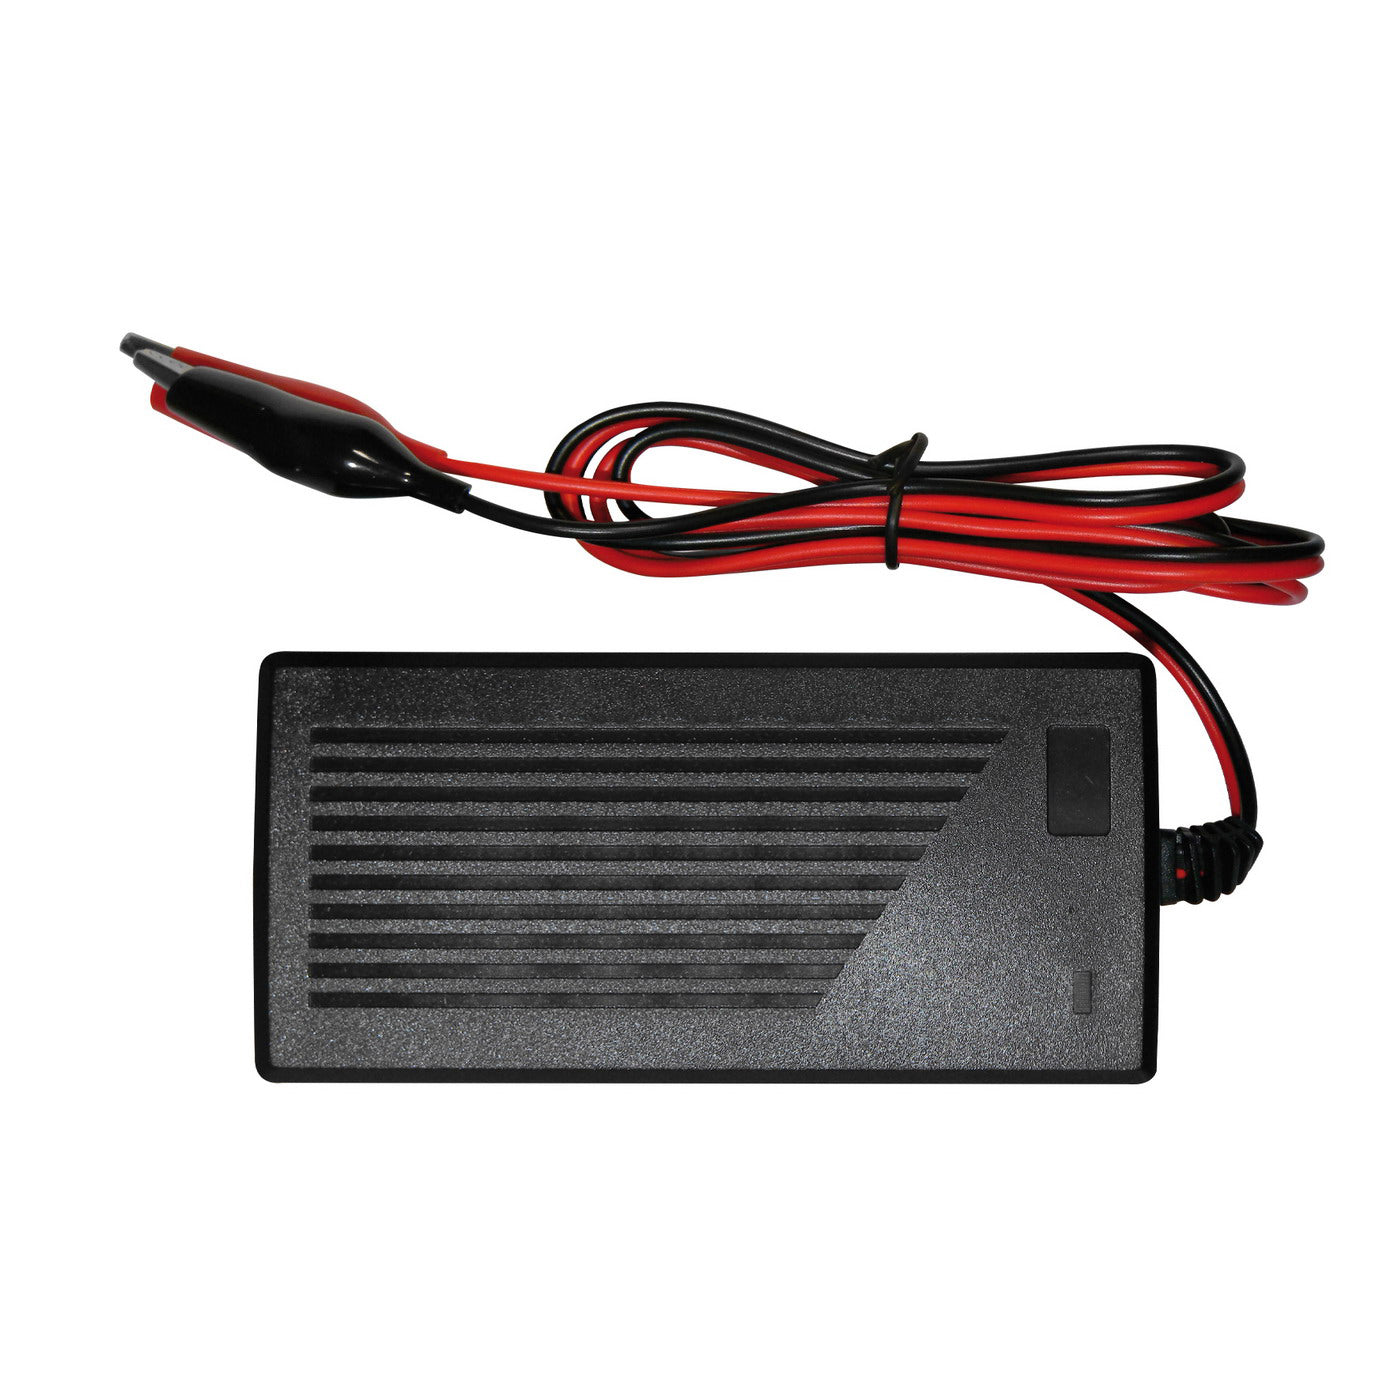 AlcaPower Switching battery charger for 24 Volt nominal voltage Li-Ion and Li-Poly battery packs